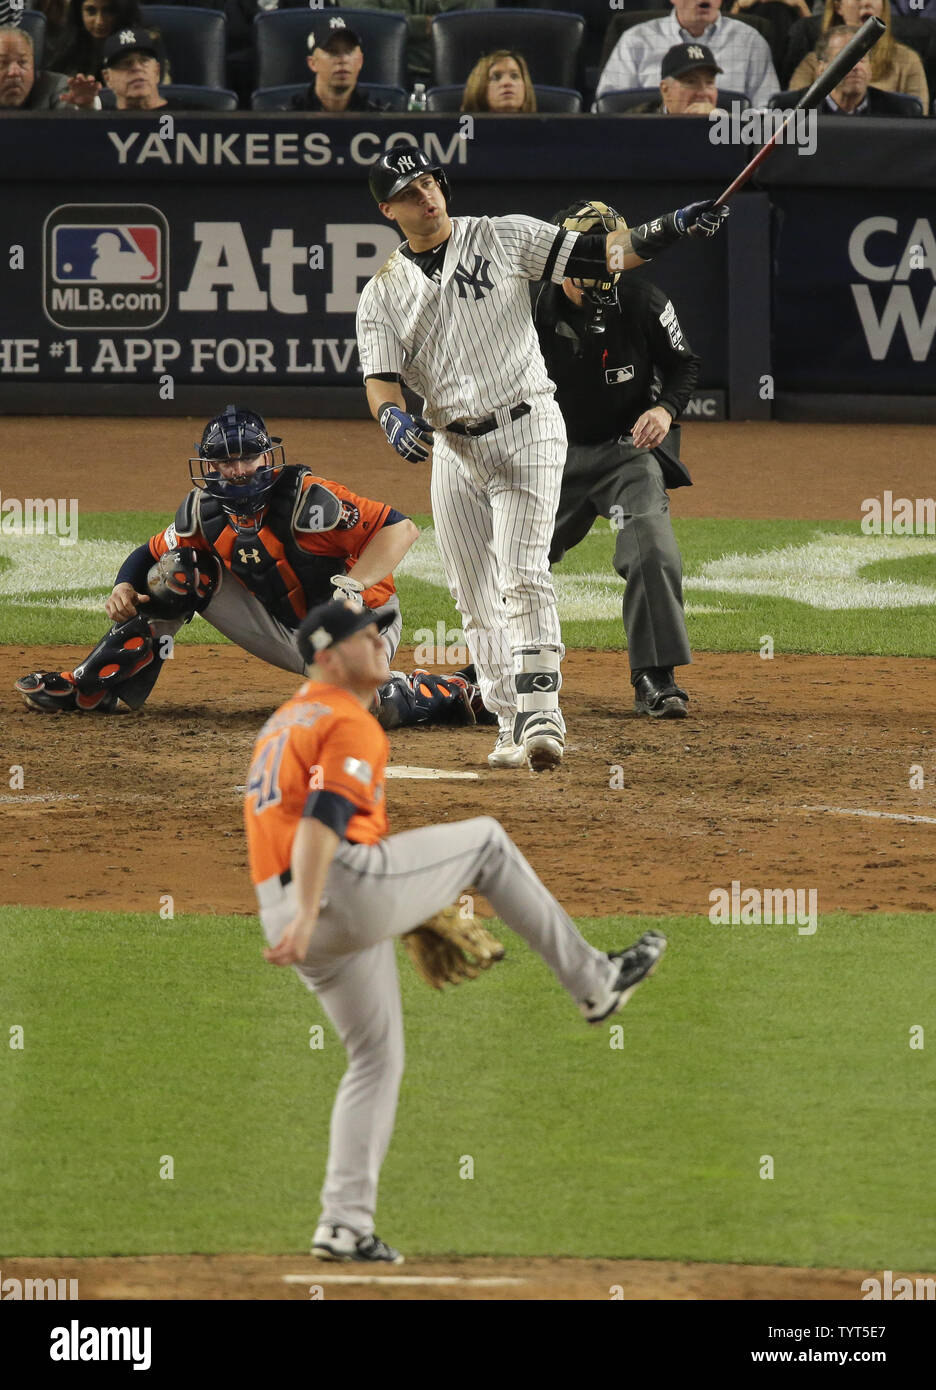 Houston Astros relief pitcher Brad Peacock (C) reacts after New York Yankees batter Gary Sanchez (R) hit a solo home run in the seventh inning in game 5 of the 2017 MLB